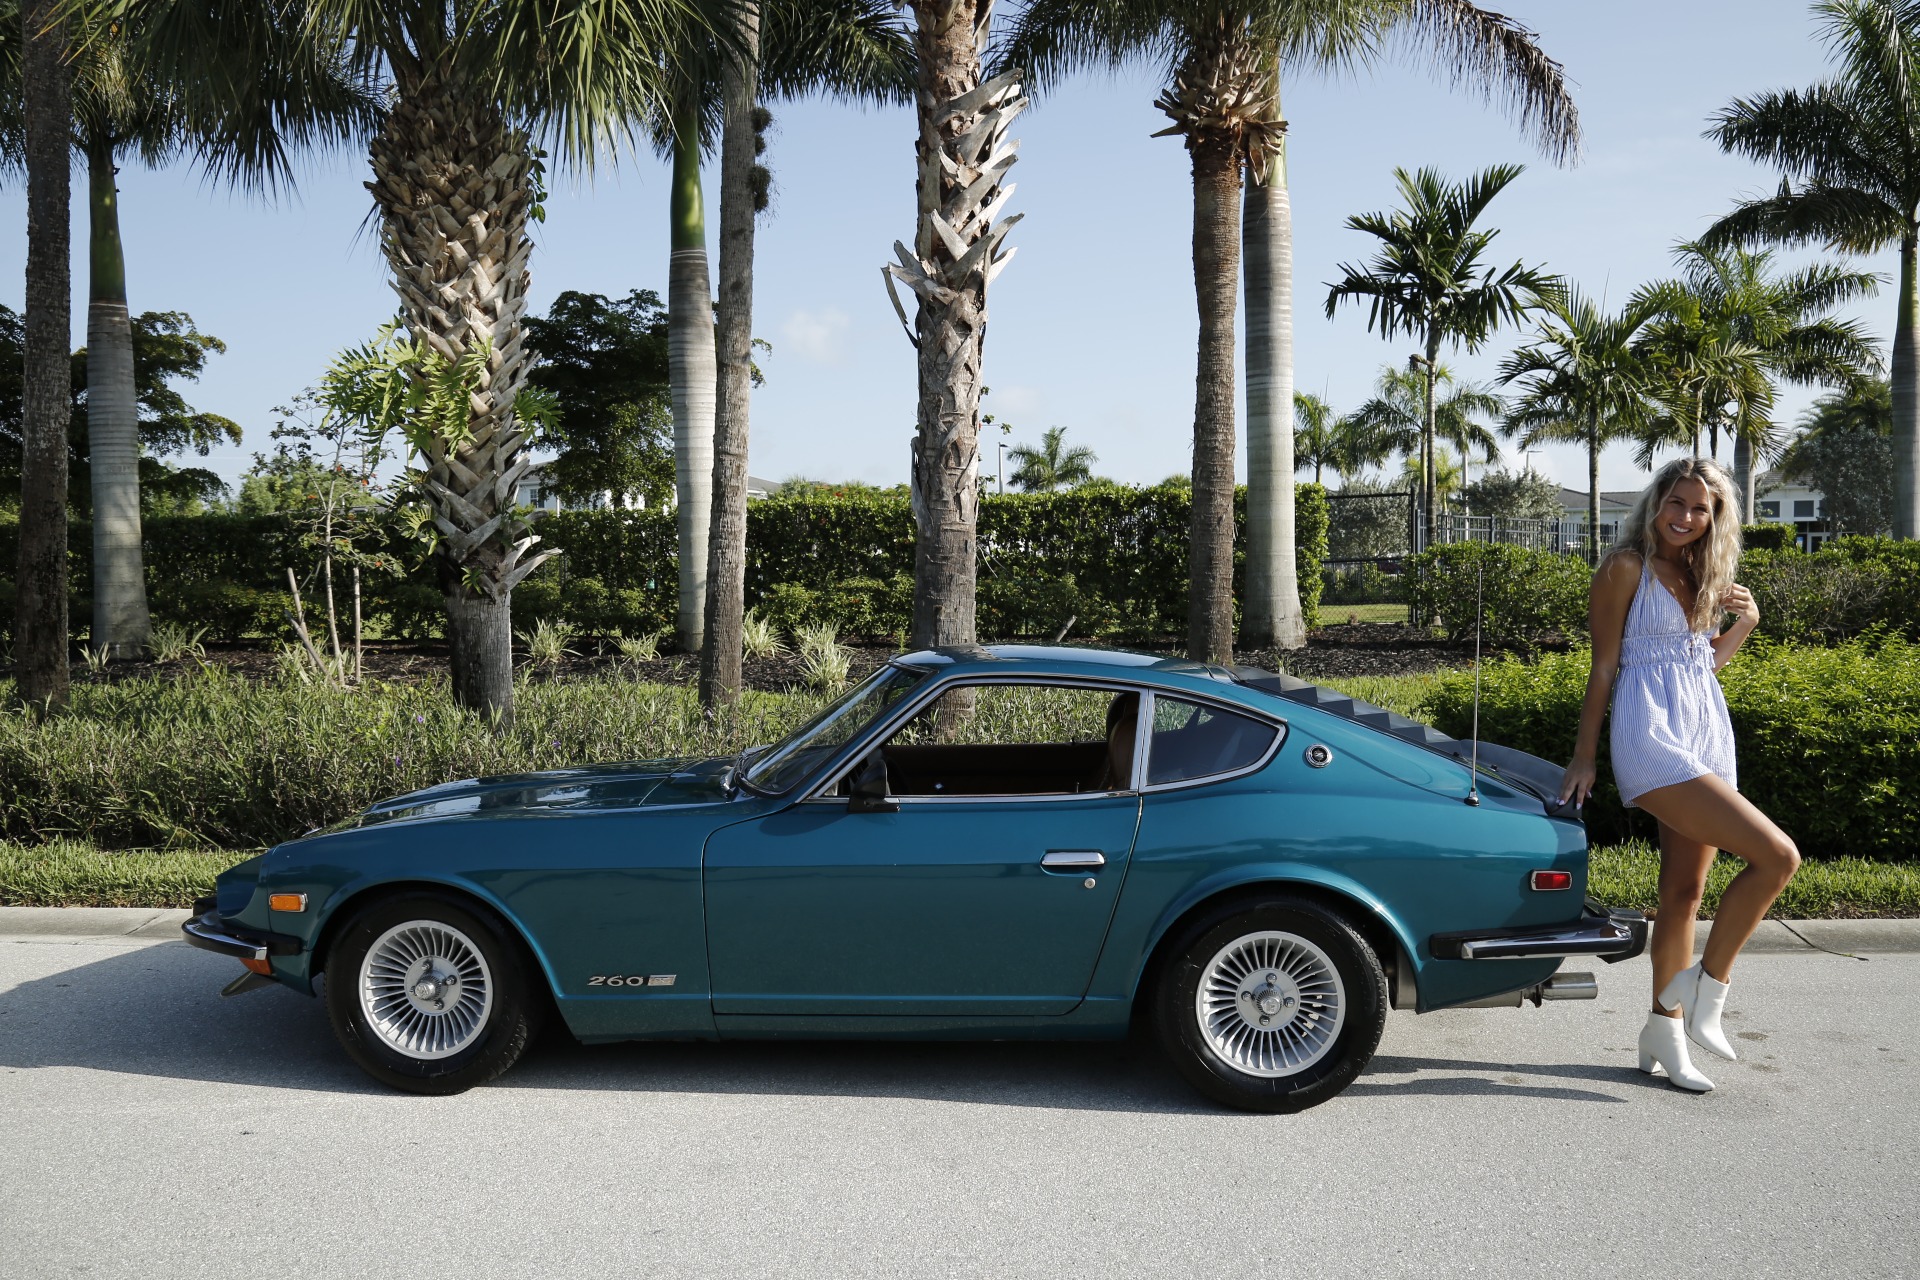 Used 1974 Datsun 260Z 260Z for sale Sold at Muscle Cars for Sale Inc. in Fort Myers FL 33912 3